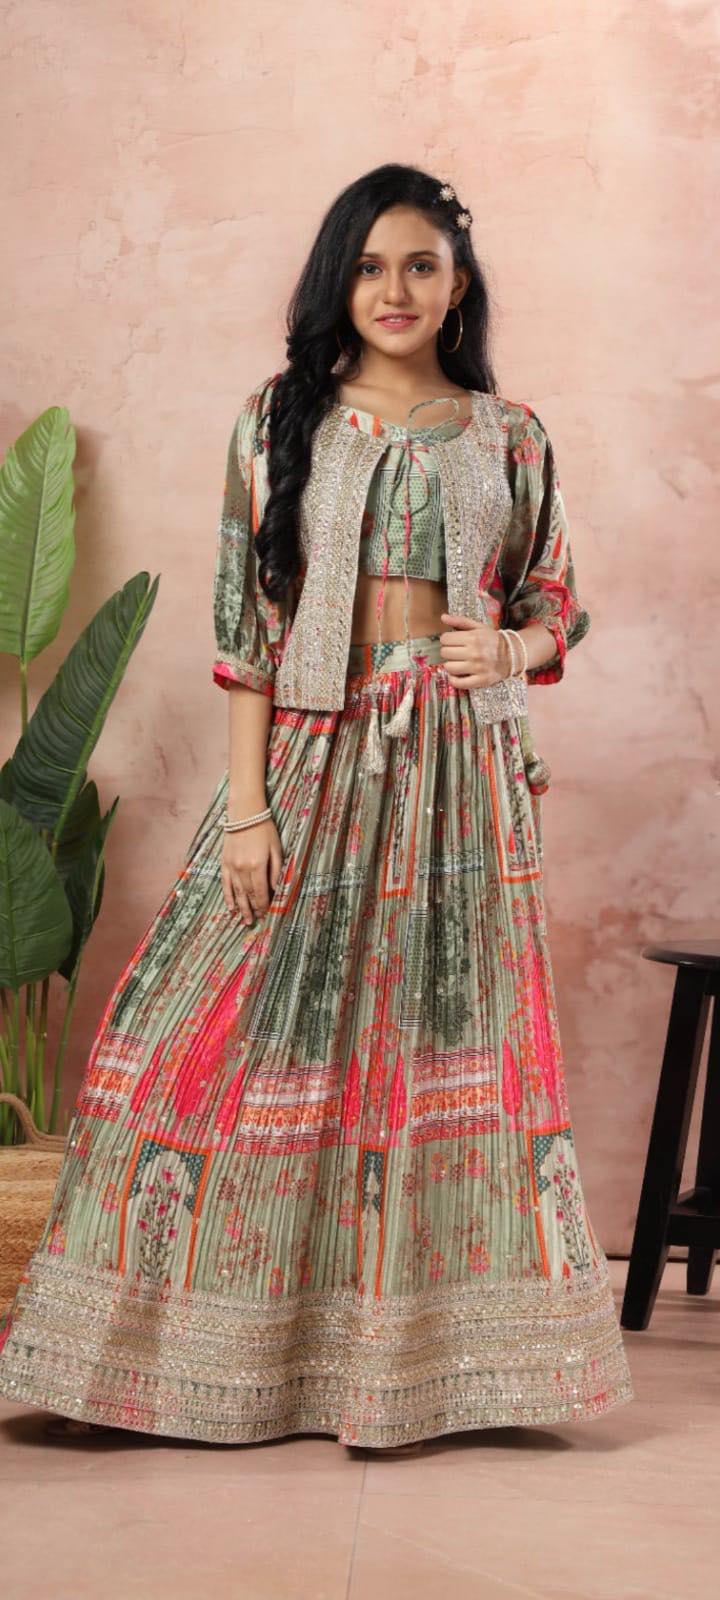 Alluring Girl's Green Lehnga Choli, Indian traditional festive outfit for Princess, Design GRL #1252